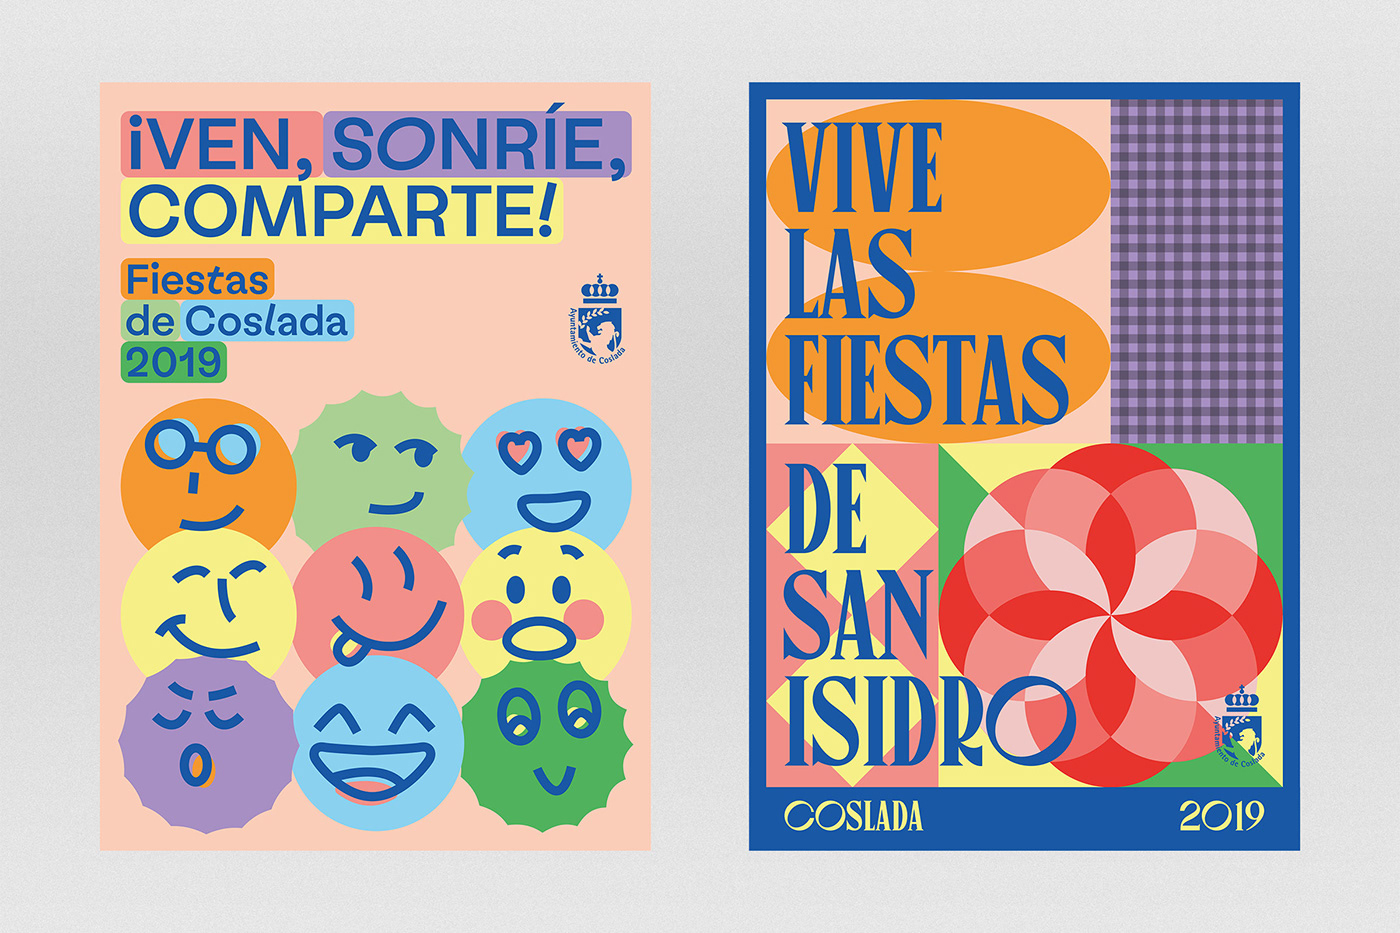 coslada madrid festivals smiley faces geometry pastel colorful smiling naive